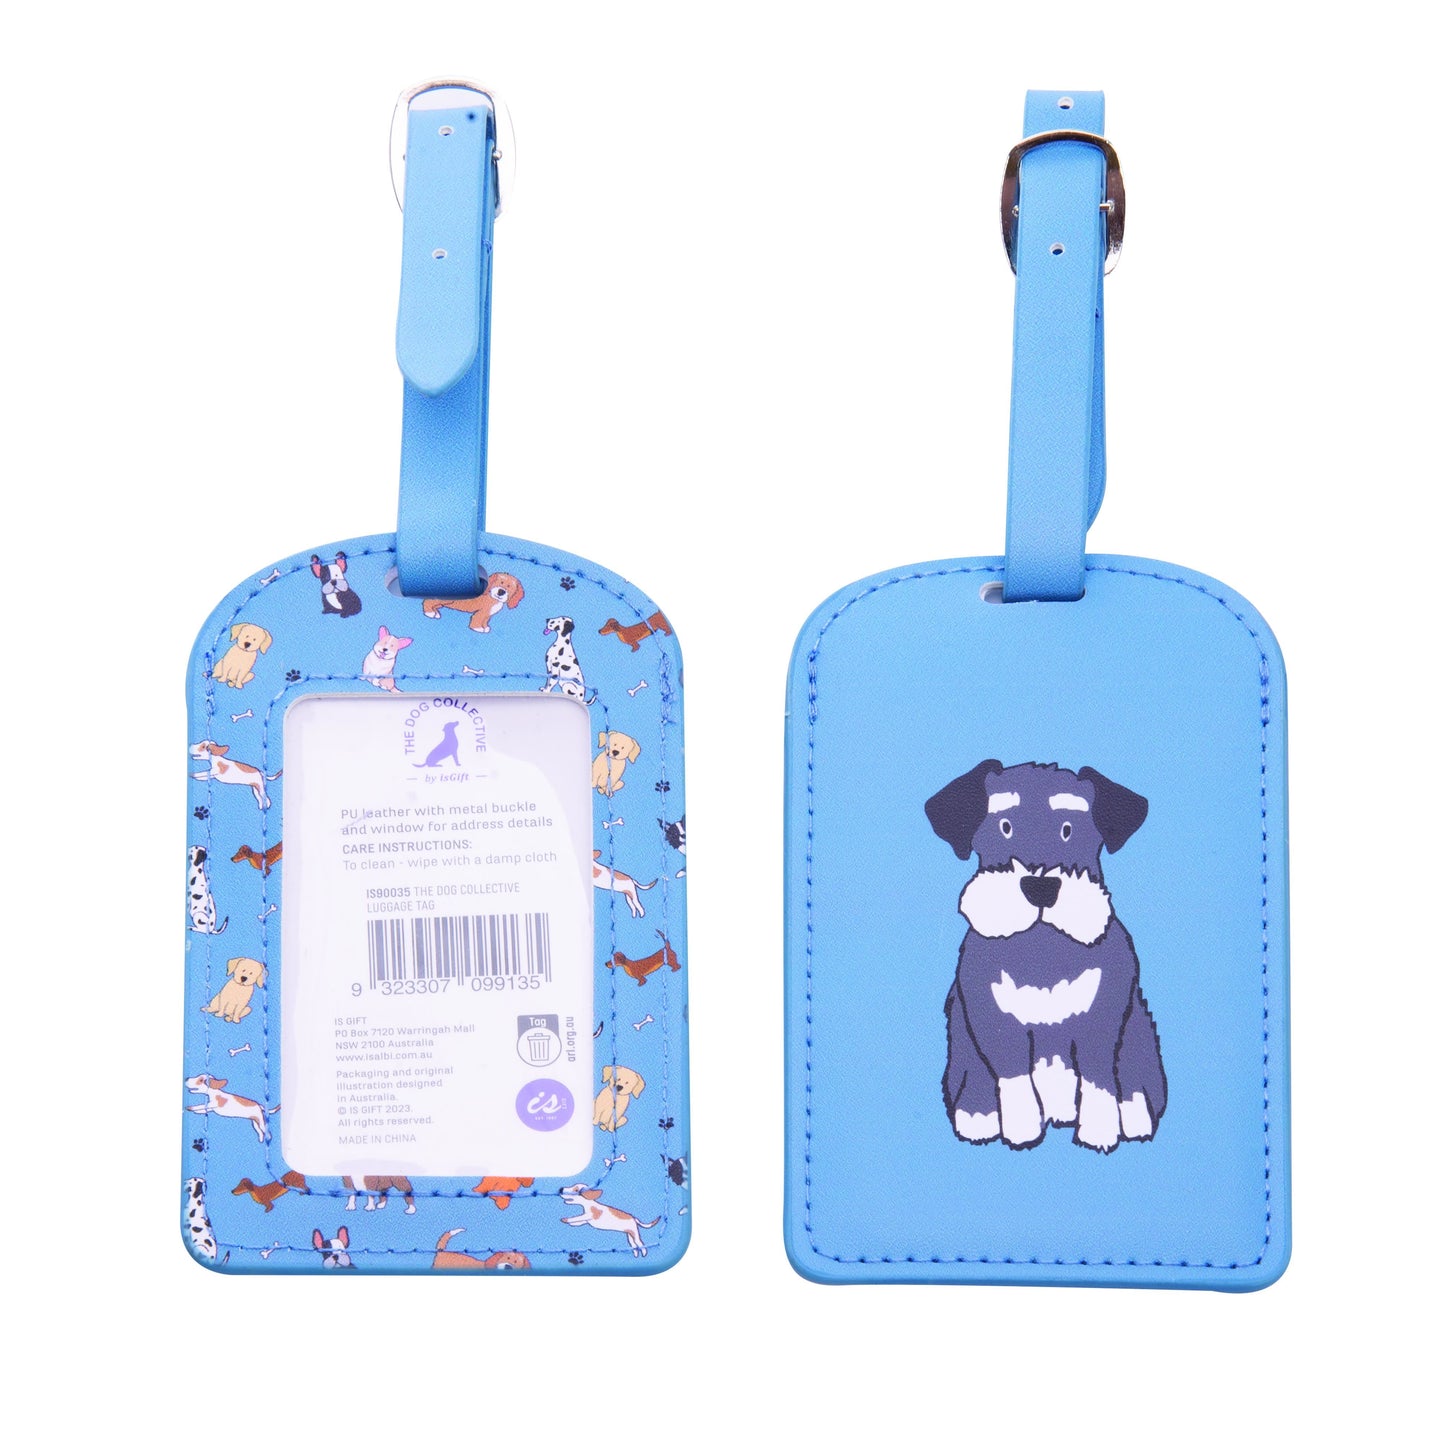 IS Luggage Tag - Dog Collective